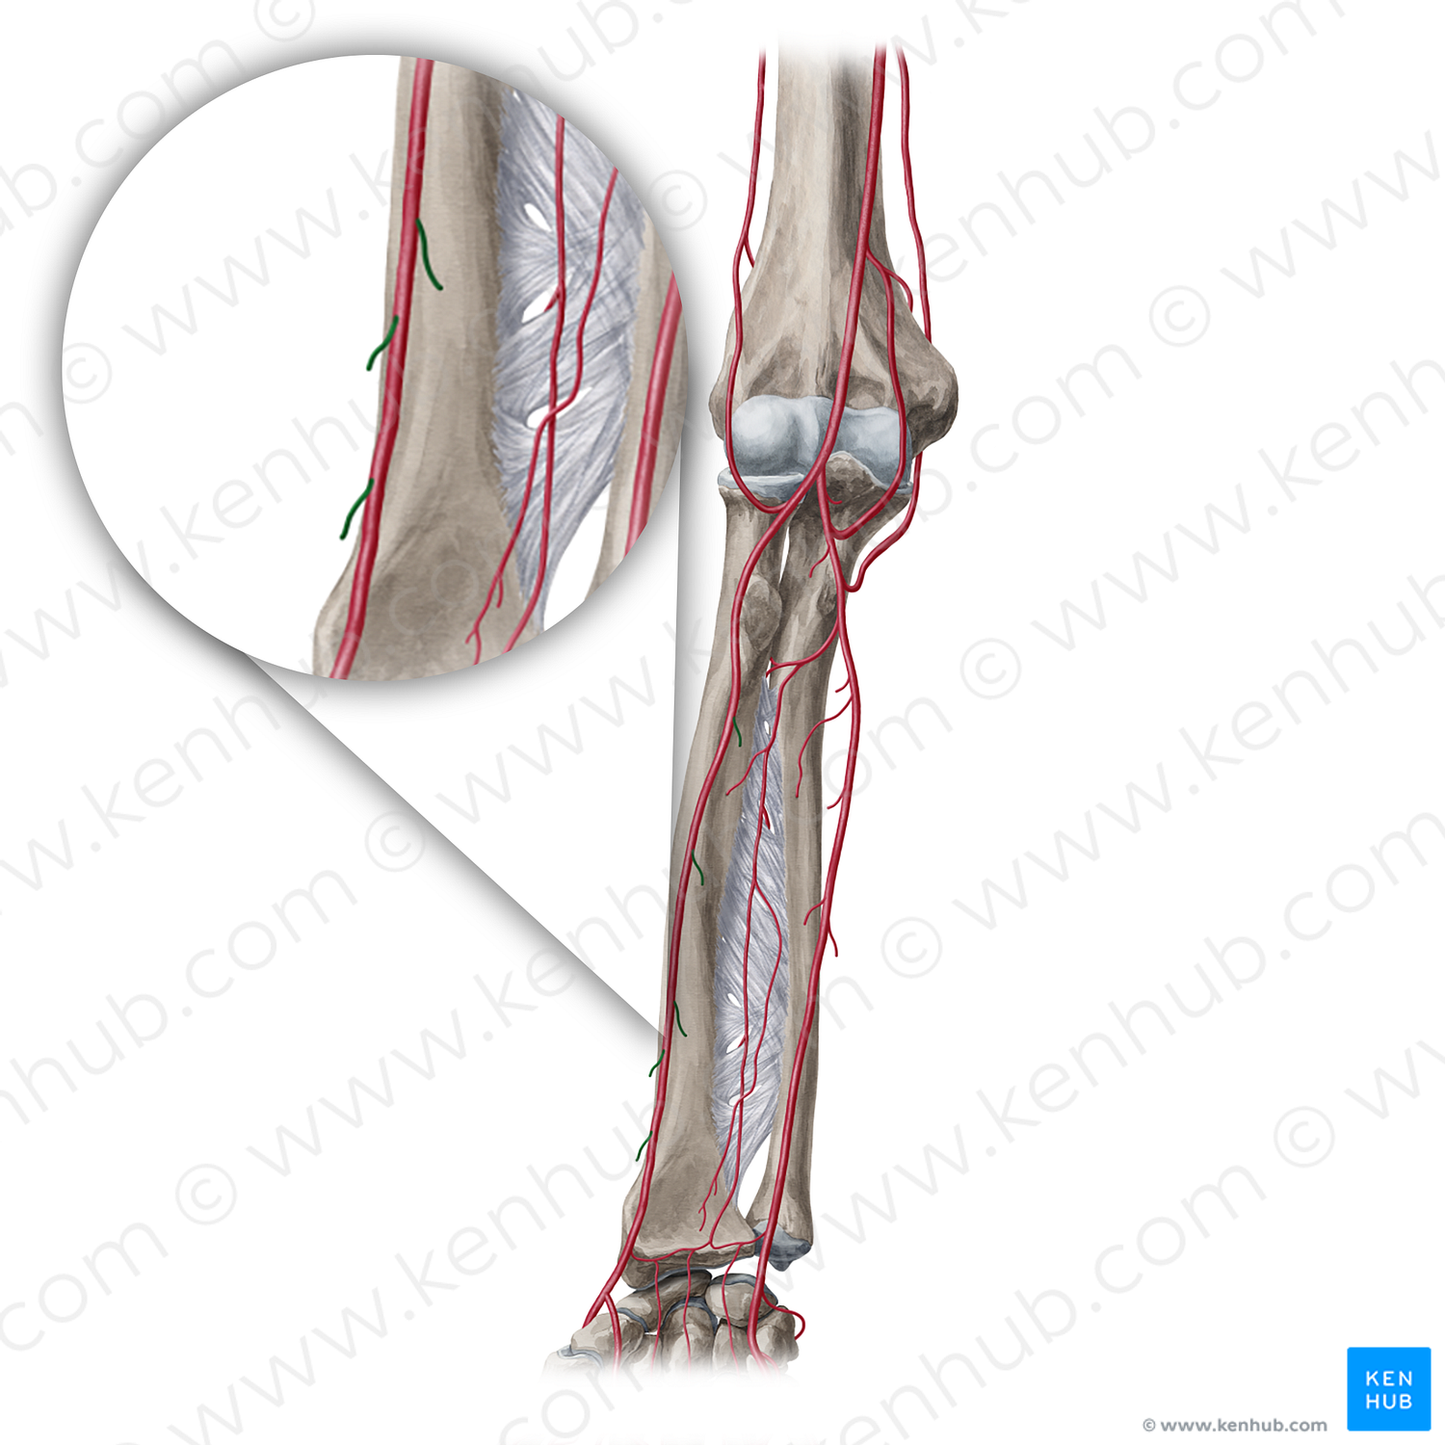 Muscular branches of radial artery (#20366)